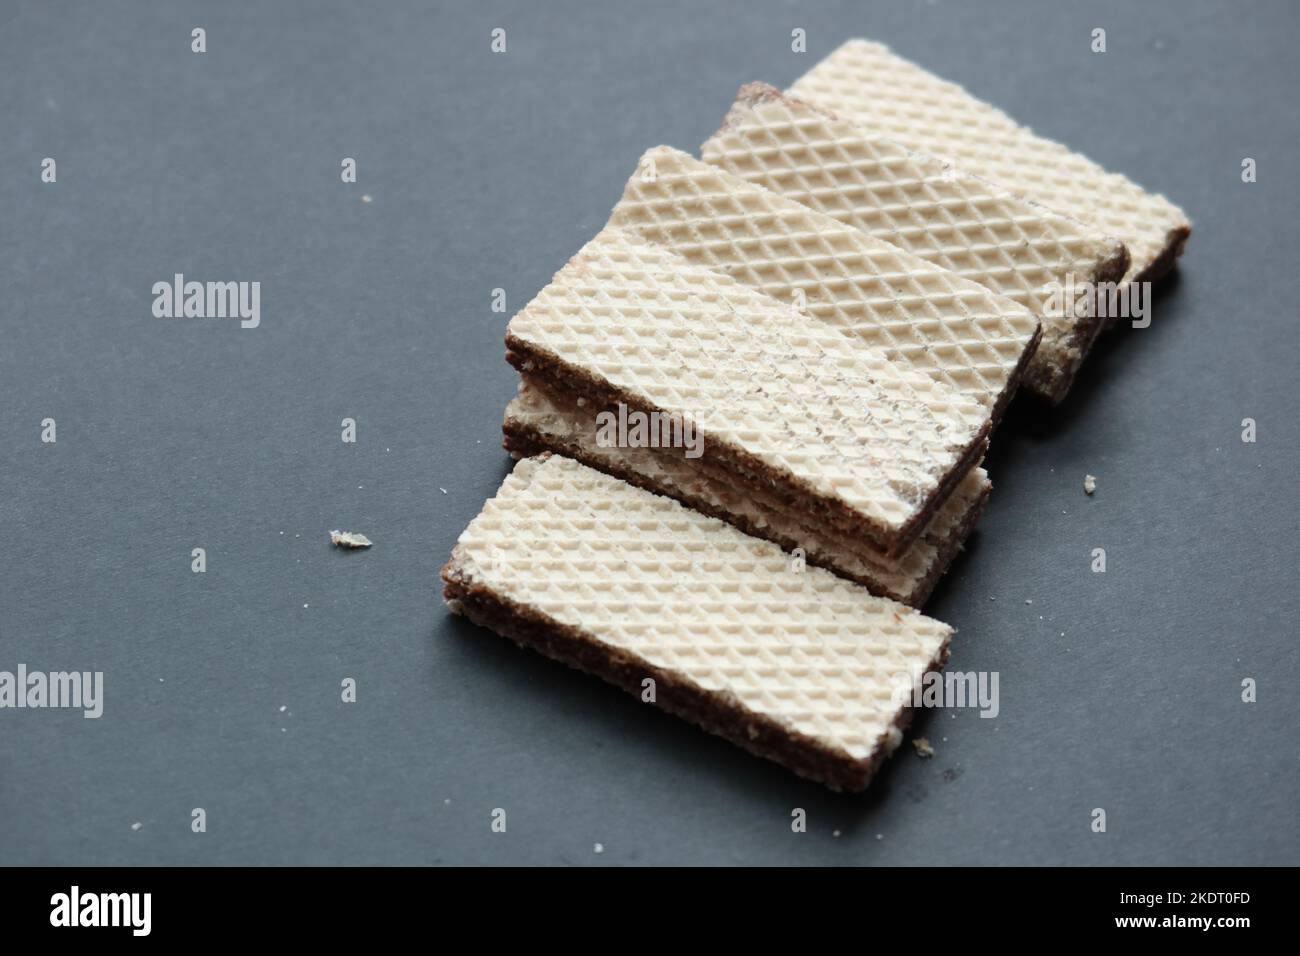 detail short of wafer roll chocolate Stock Photo